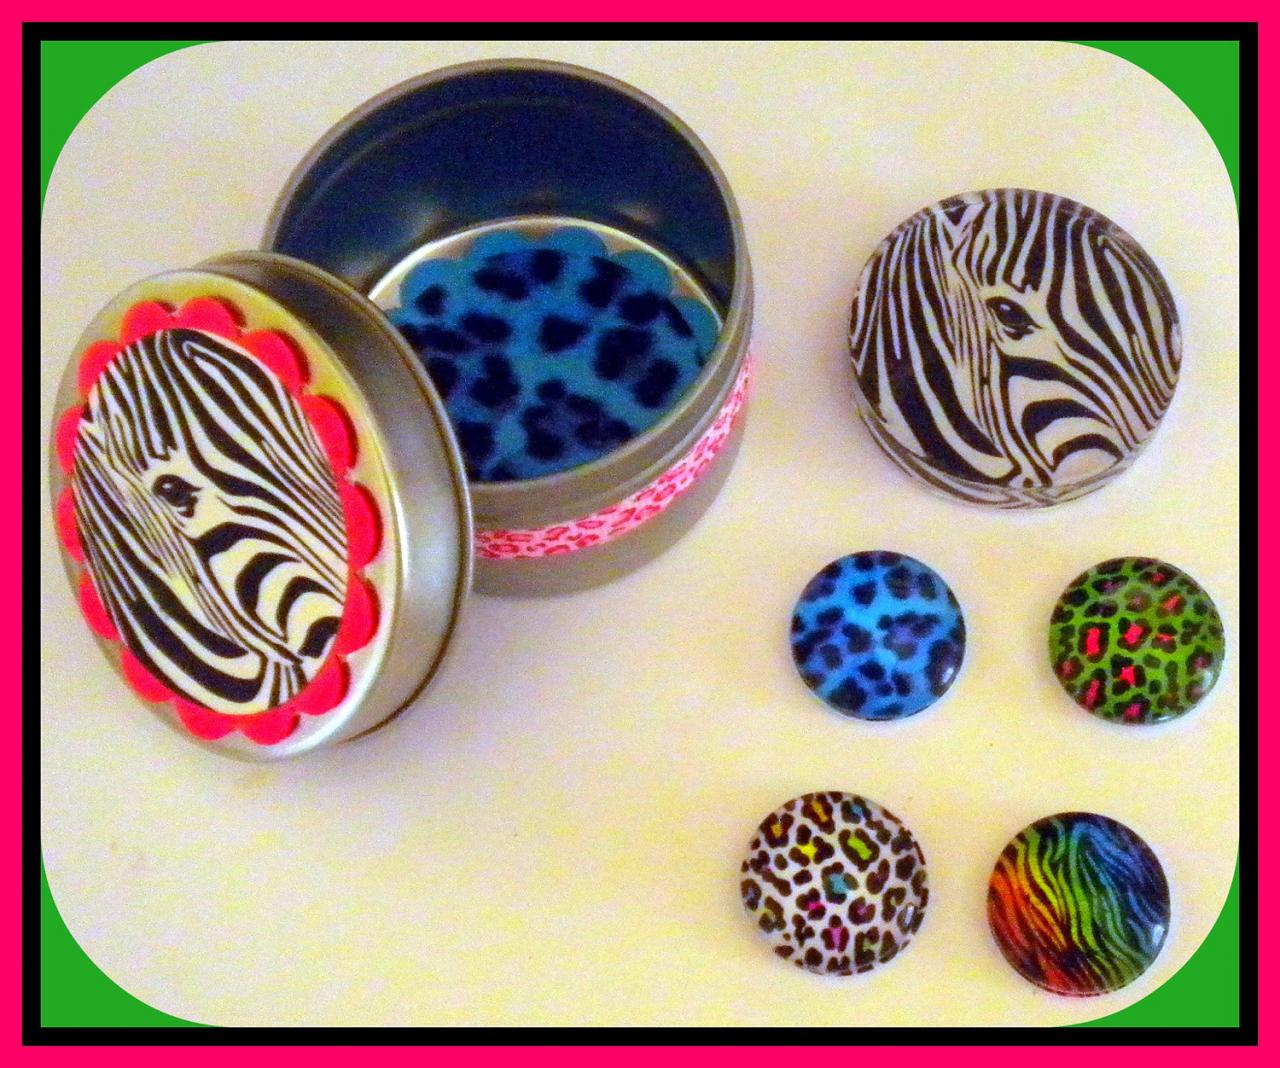 - Magnets - Safari Magnets - Set In Gift Tin - 5 Magnets - 20% Off - Last One